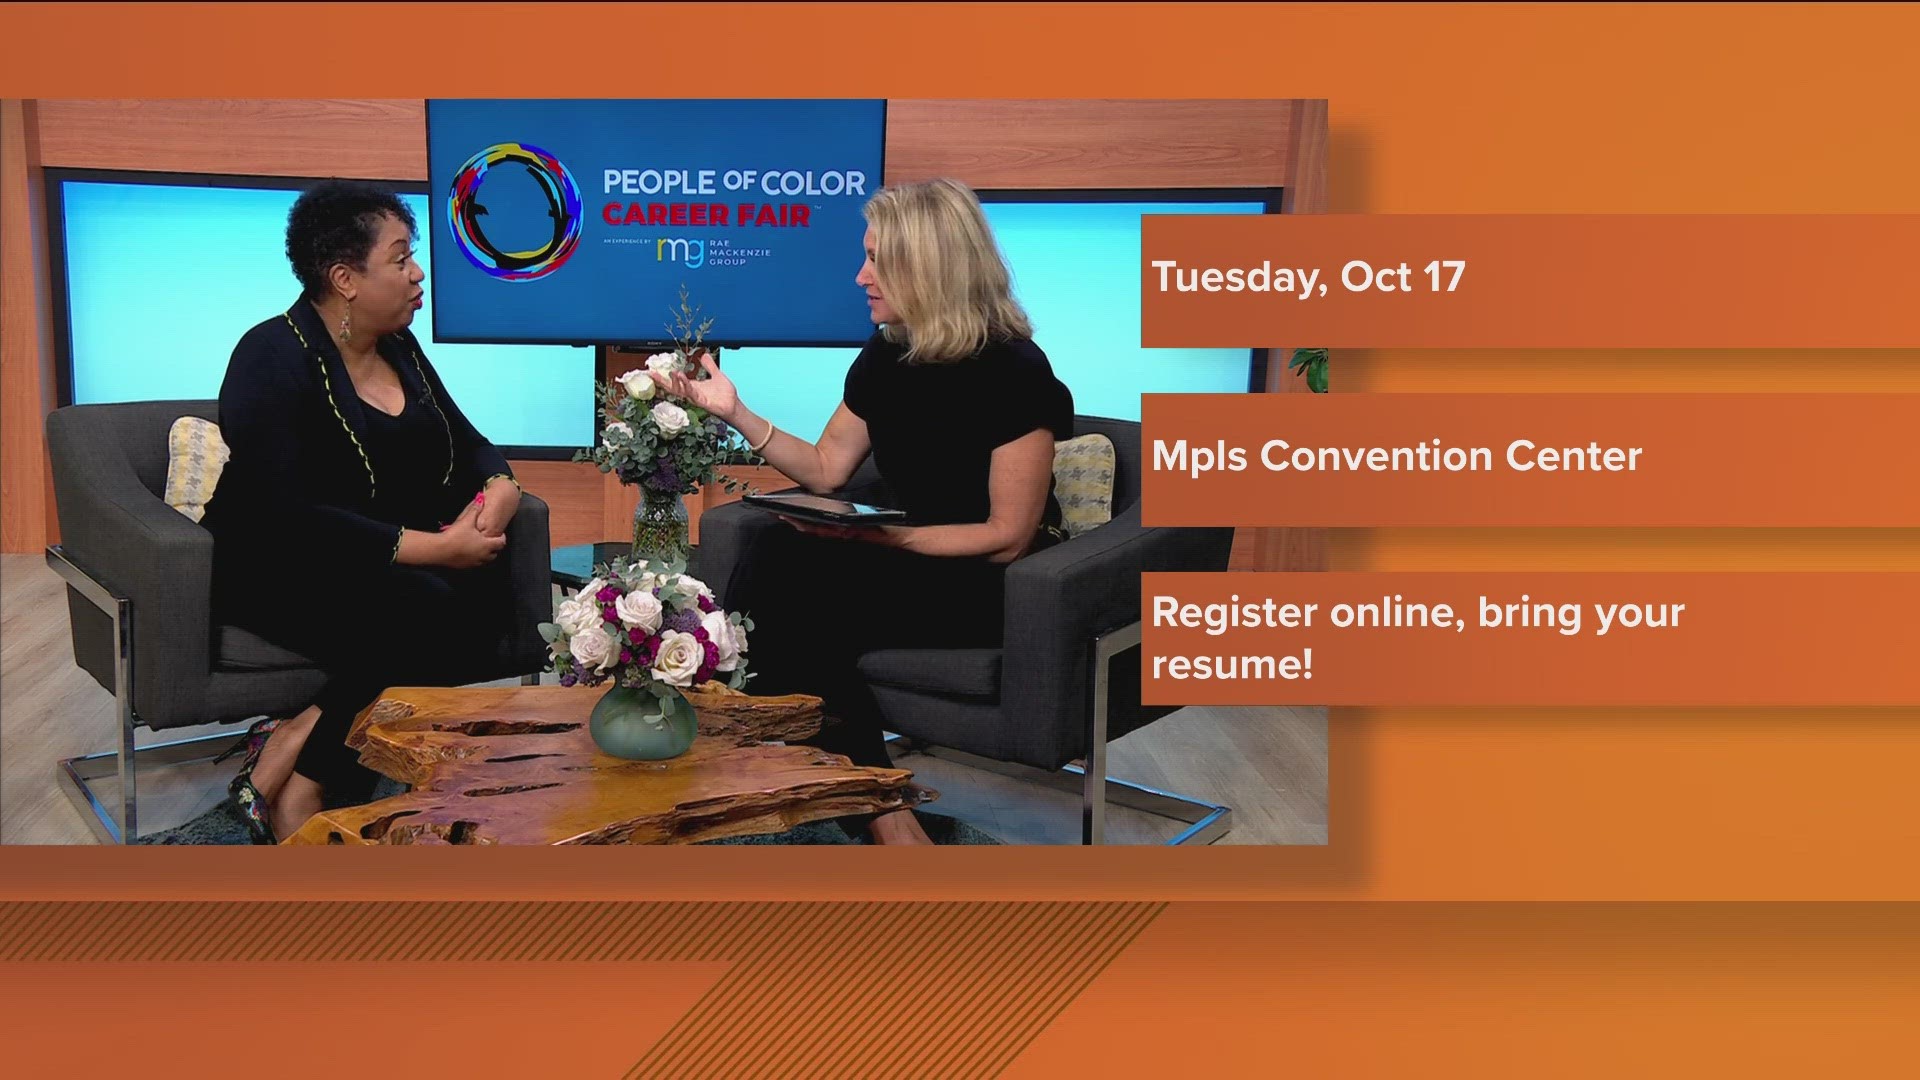 The People of Color Career Fair is on Tuesday, Oct. 17 at the Minneapolis Convention Center Ballroom.